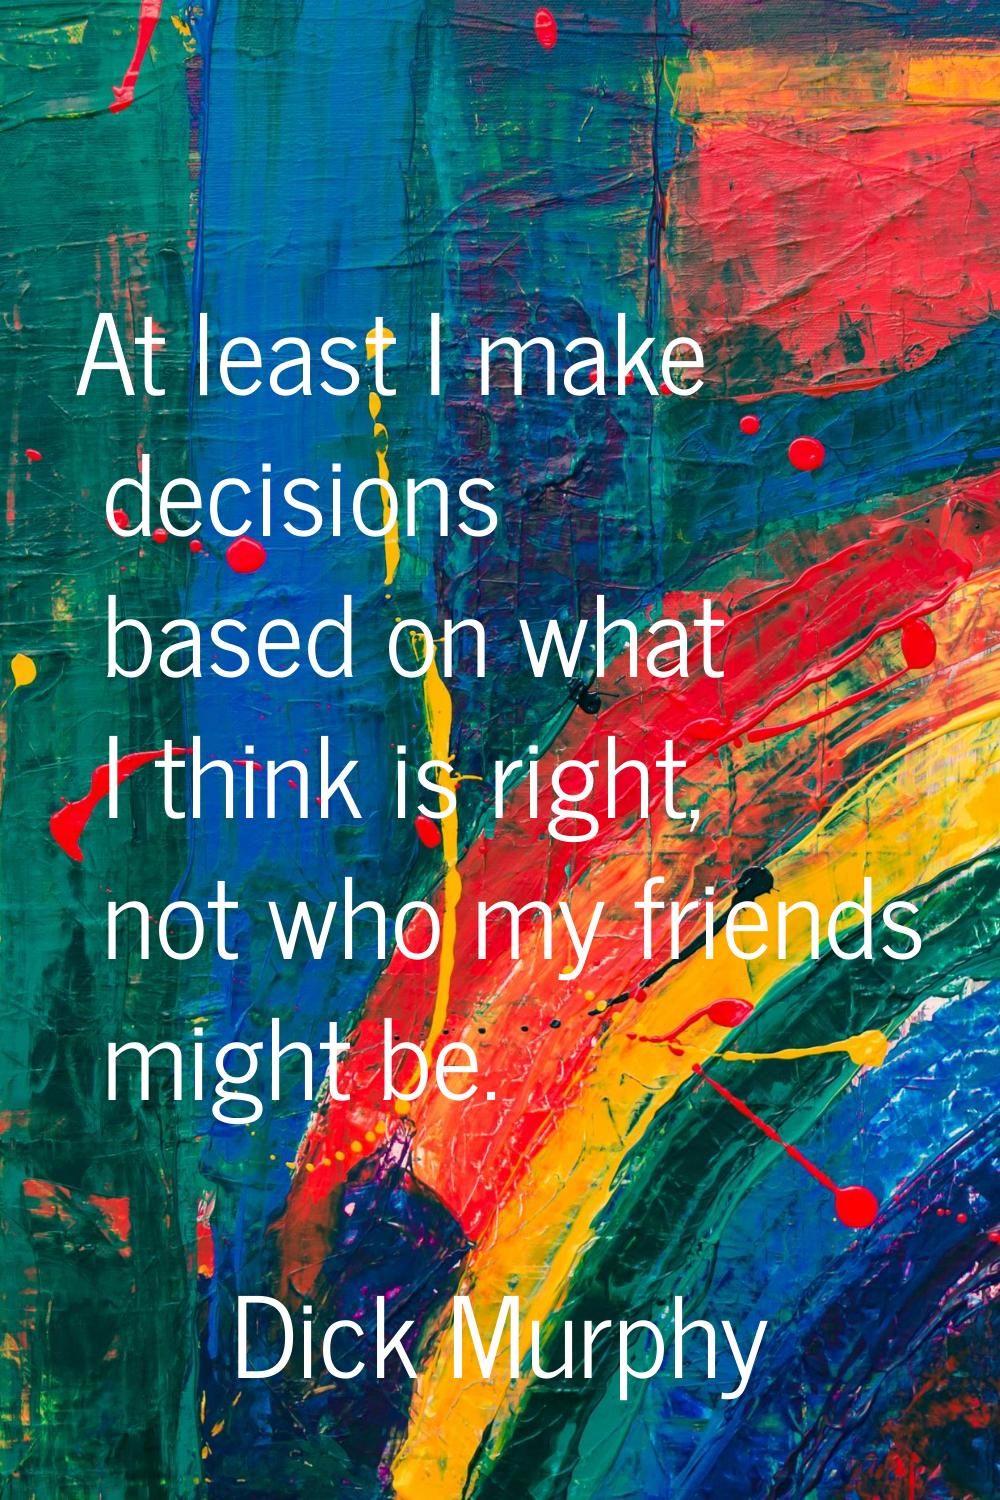 At least I make decisions based on what I think is right, not who my friends might be.